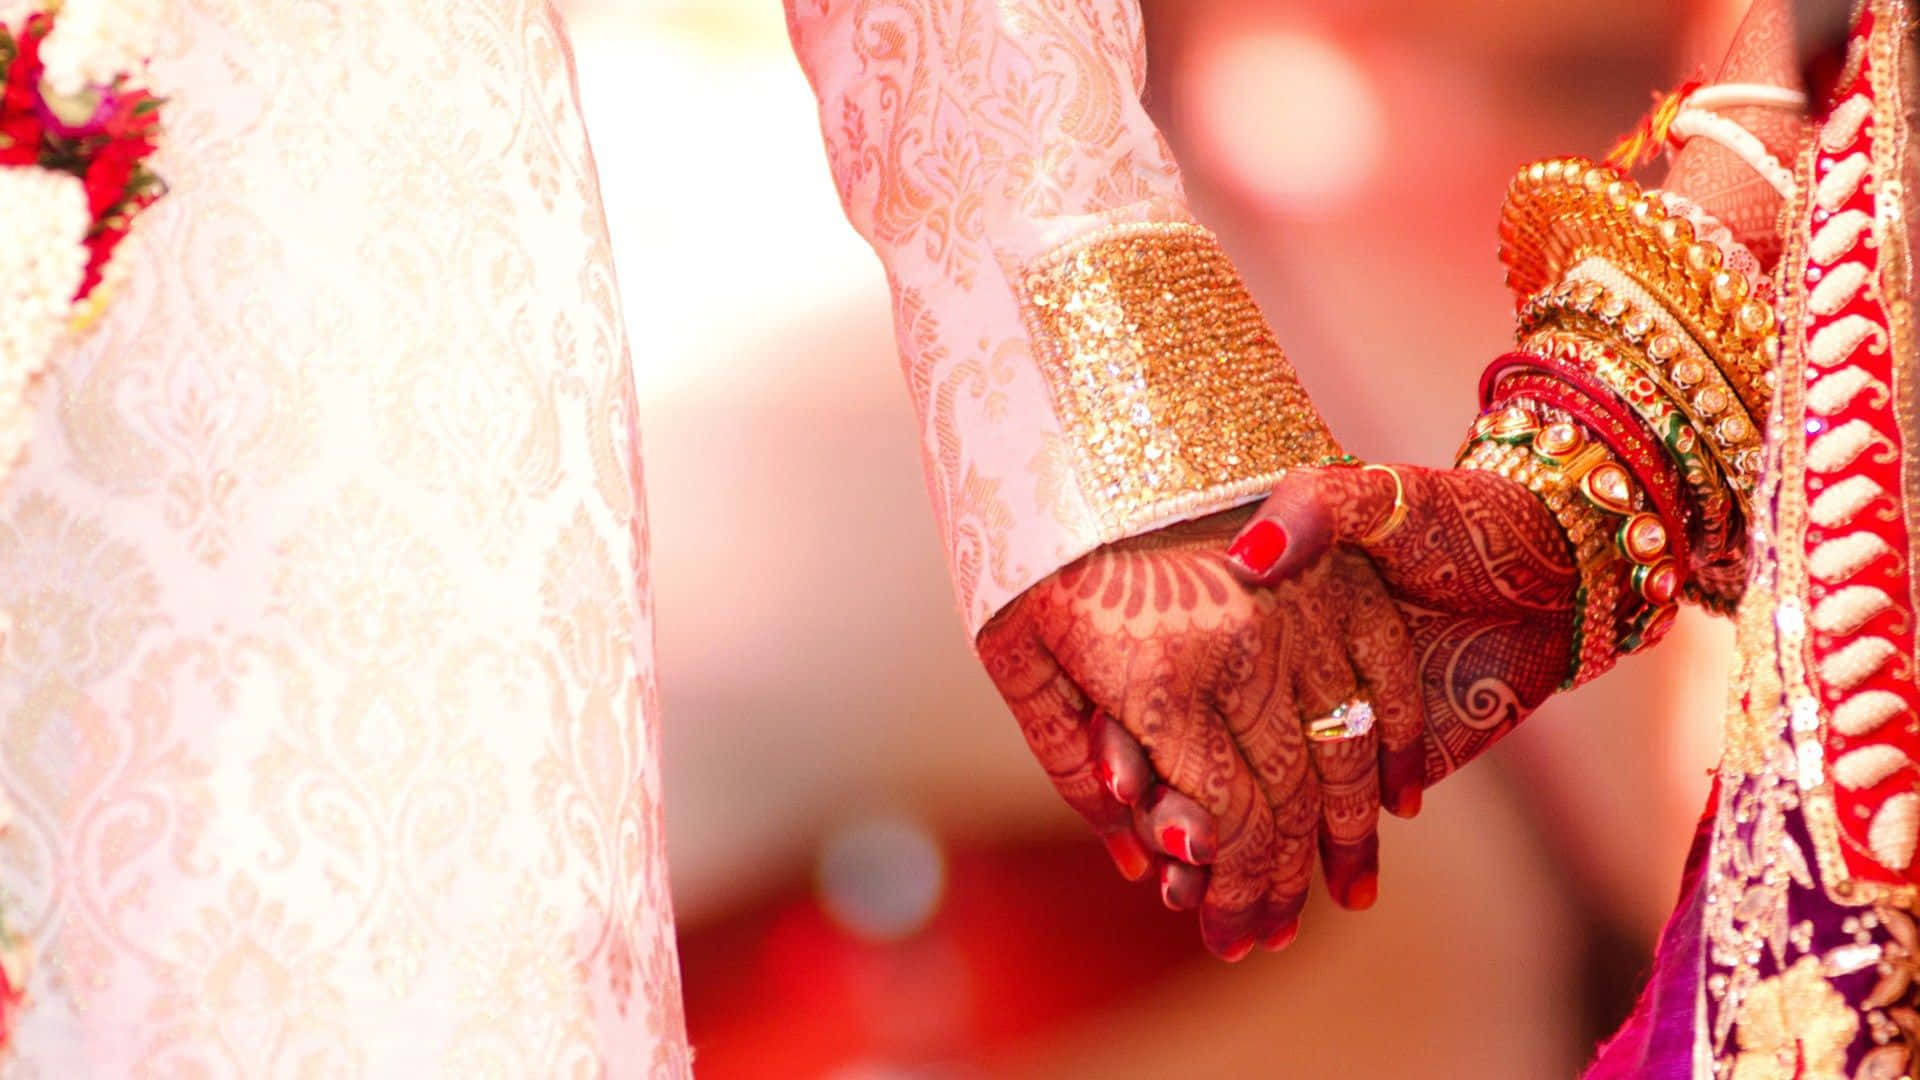 A Bride And Groom Holding Hands In A Wedding Ceremony